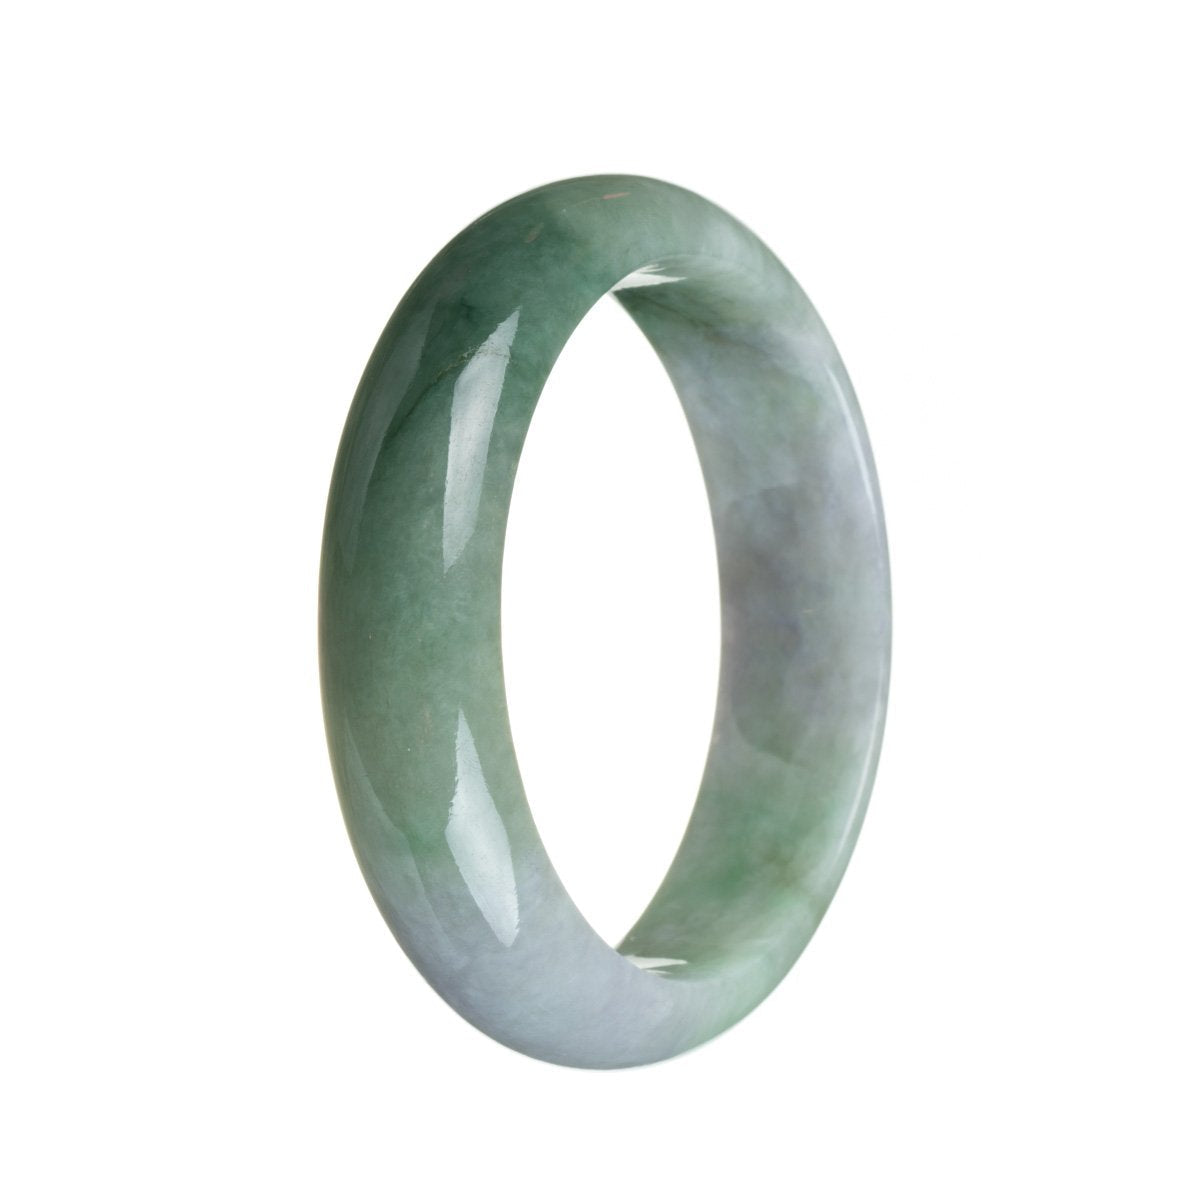 A beautiful lavender and green jade bangle bracelet, featuring a half moon design, crafted with genuine Type A jade. Perfect for adding a touch of elegance to any outfit.